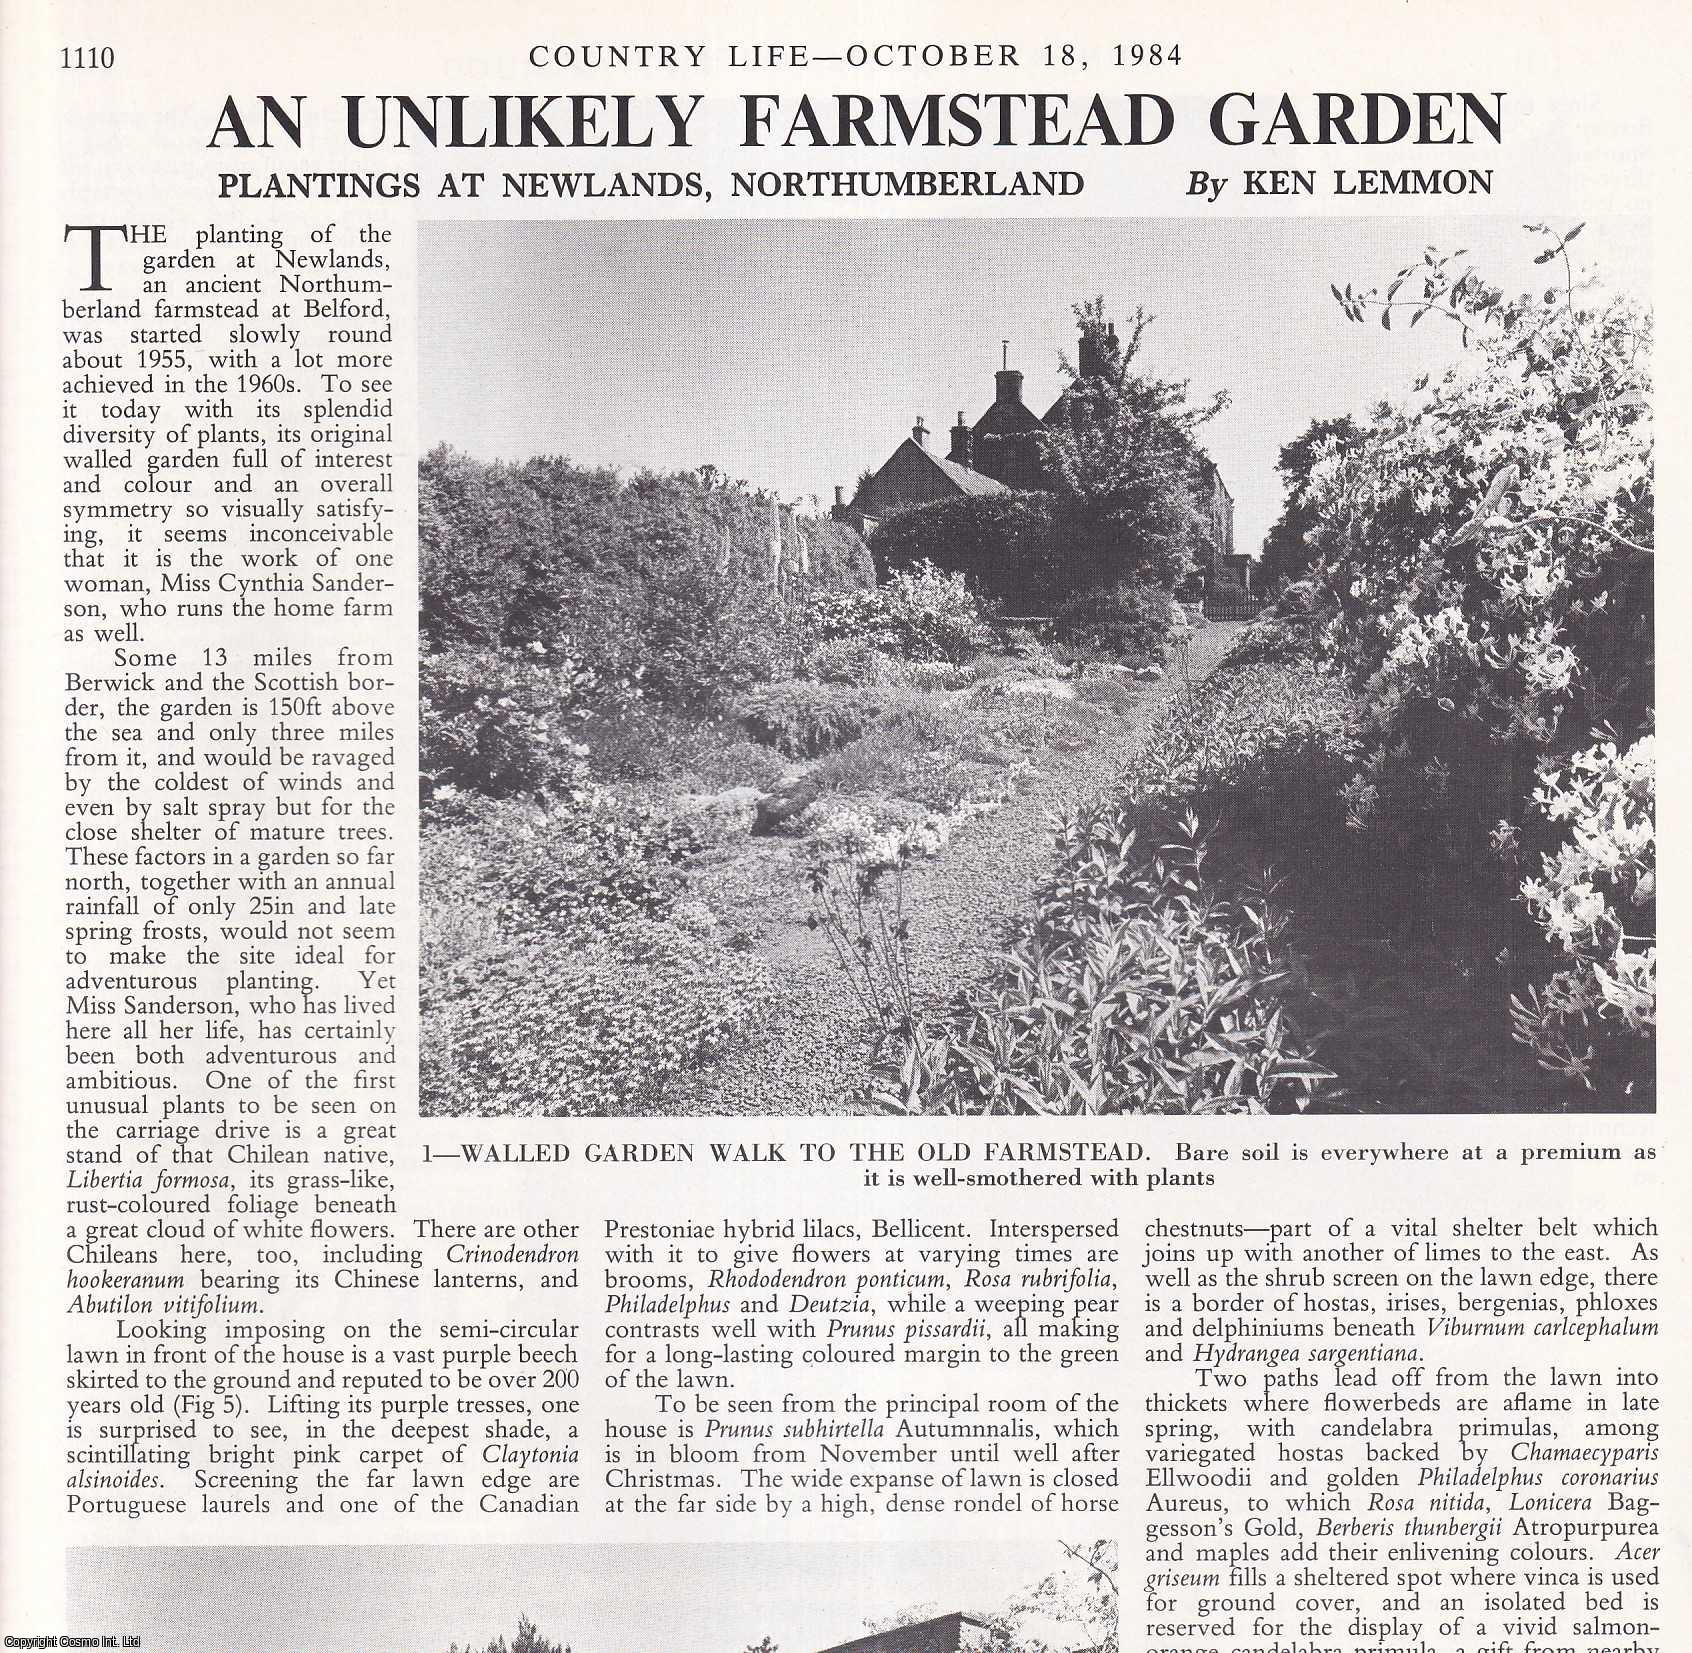 Ken Lemmon - The Planting of the Garden at the Ancient Northumberland Farmstead Newlands, at Belford. Several pictures and accompanying text, removed from an original issue of Country Life Magazine, 1984.